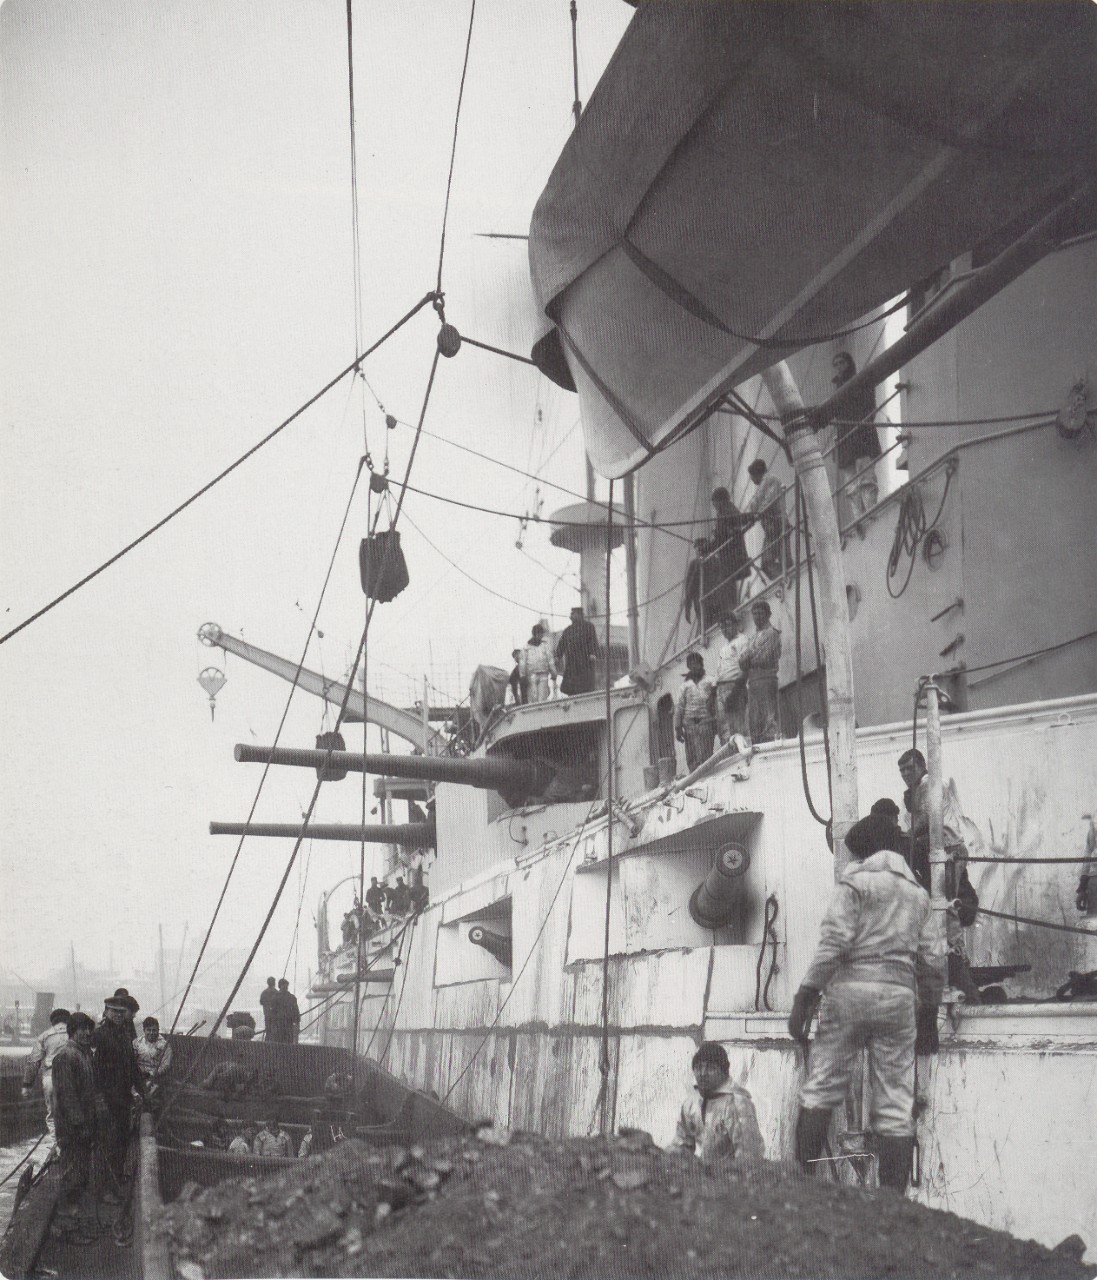 A picture of hoisting coal onto a ship with cranes.